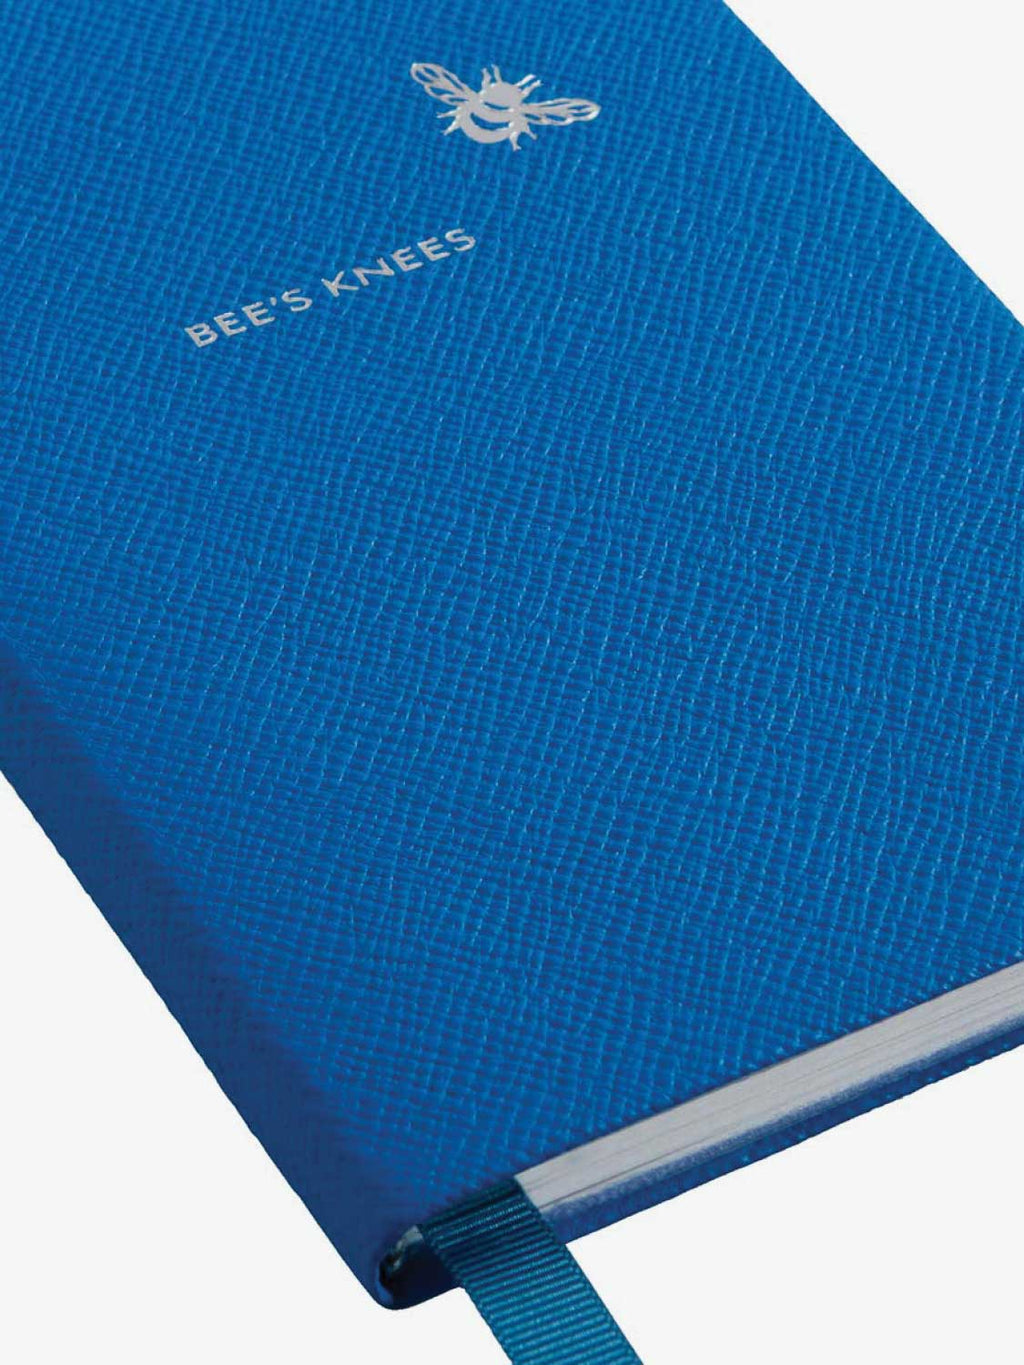 Smythson Bees Knees Notebook | B